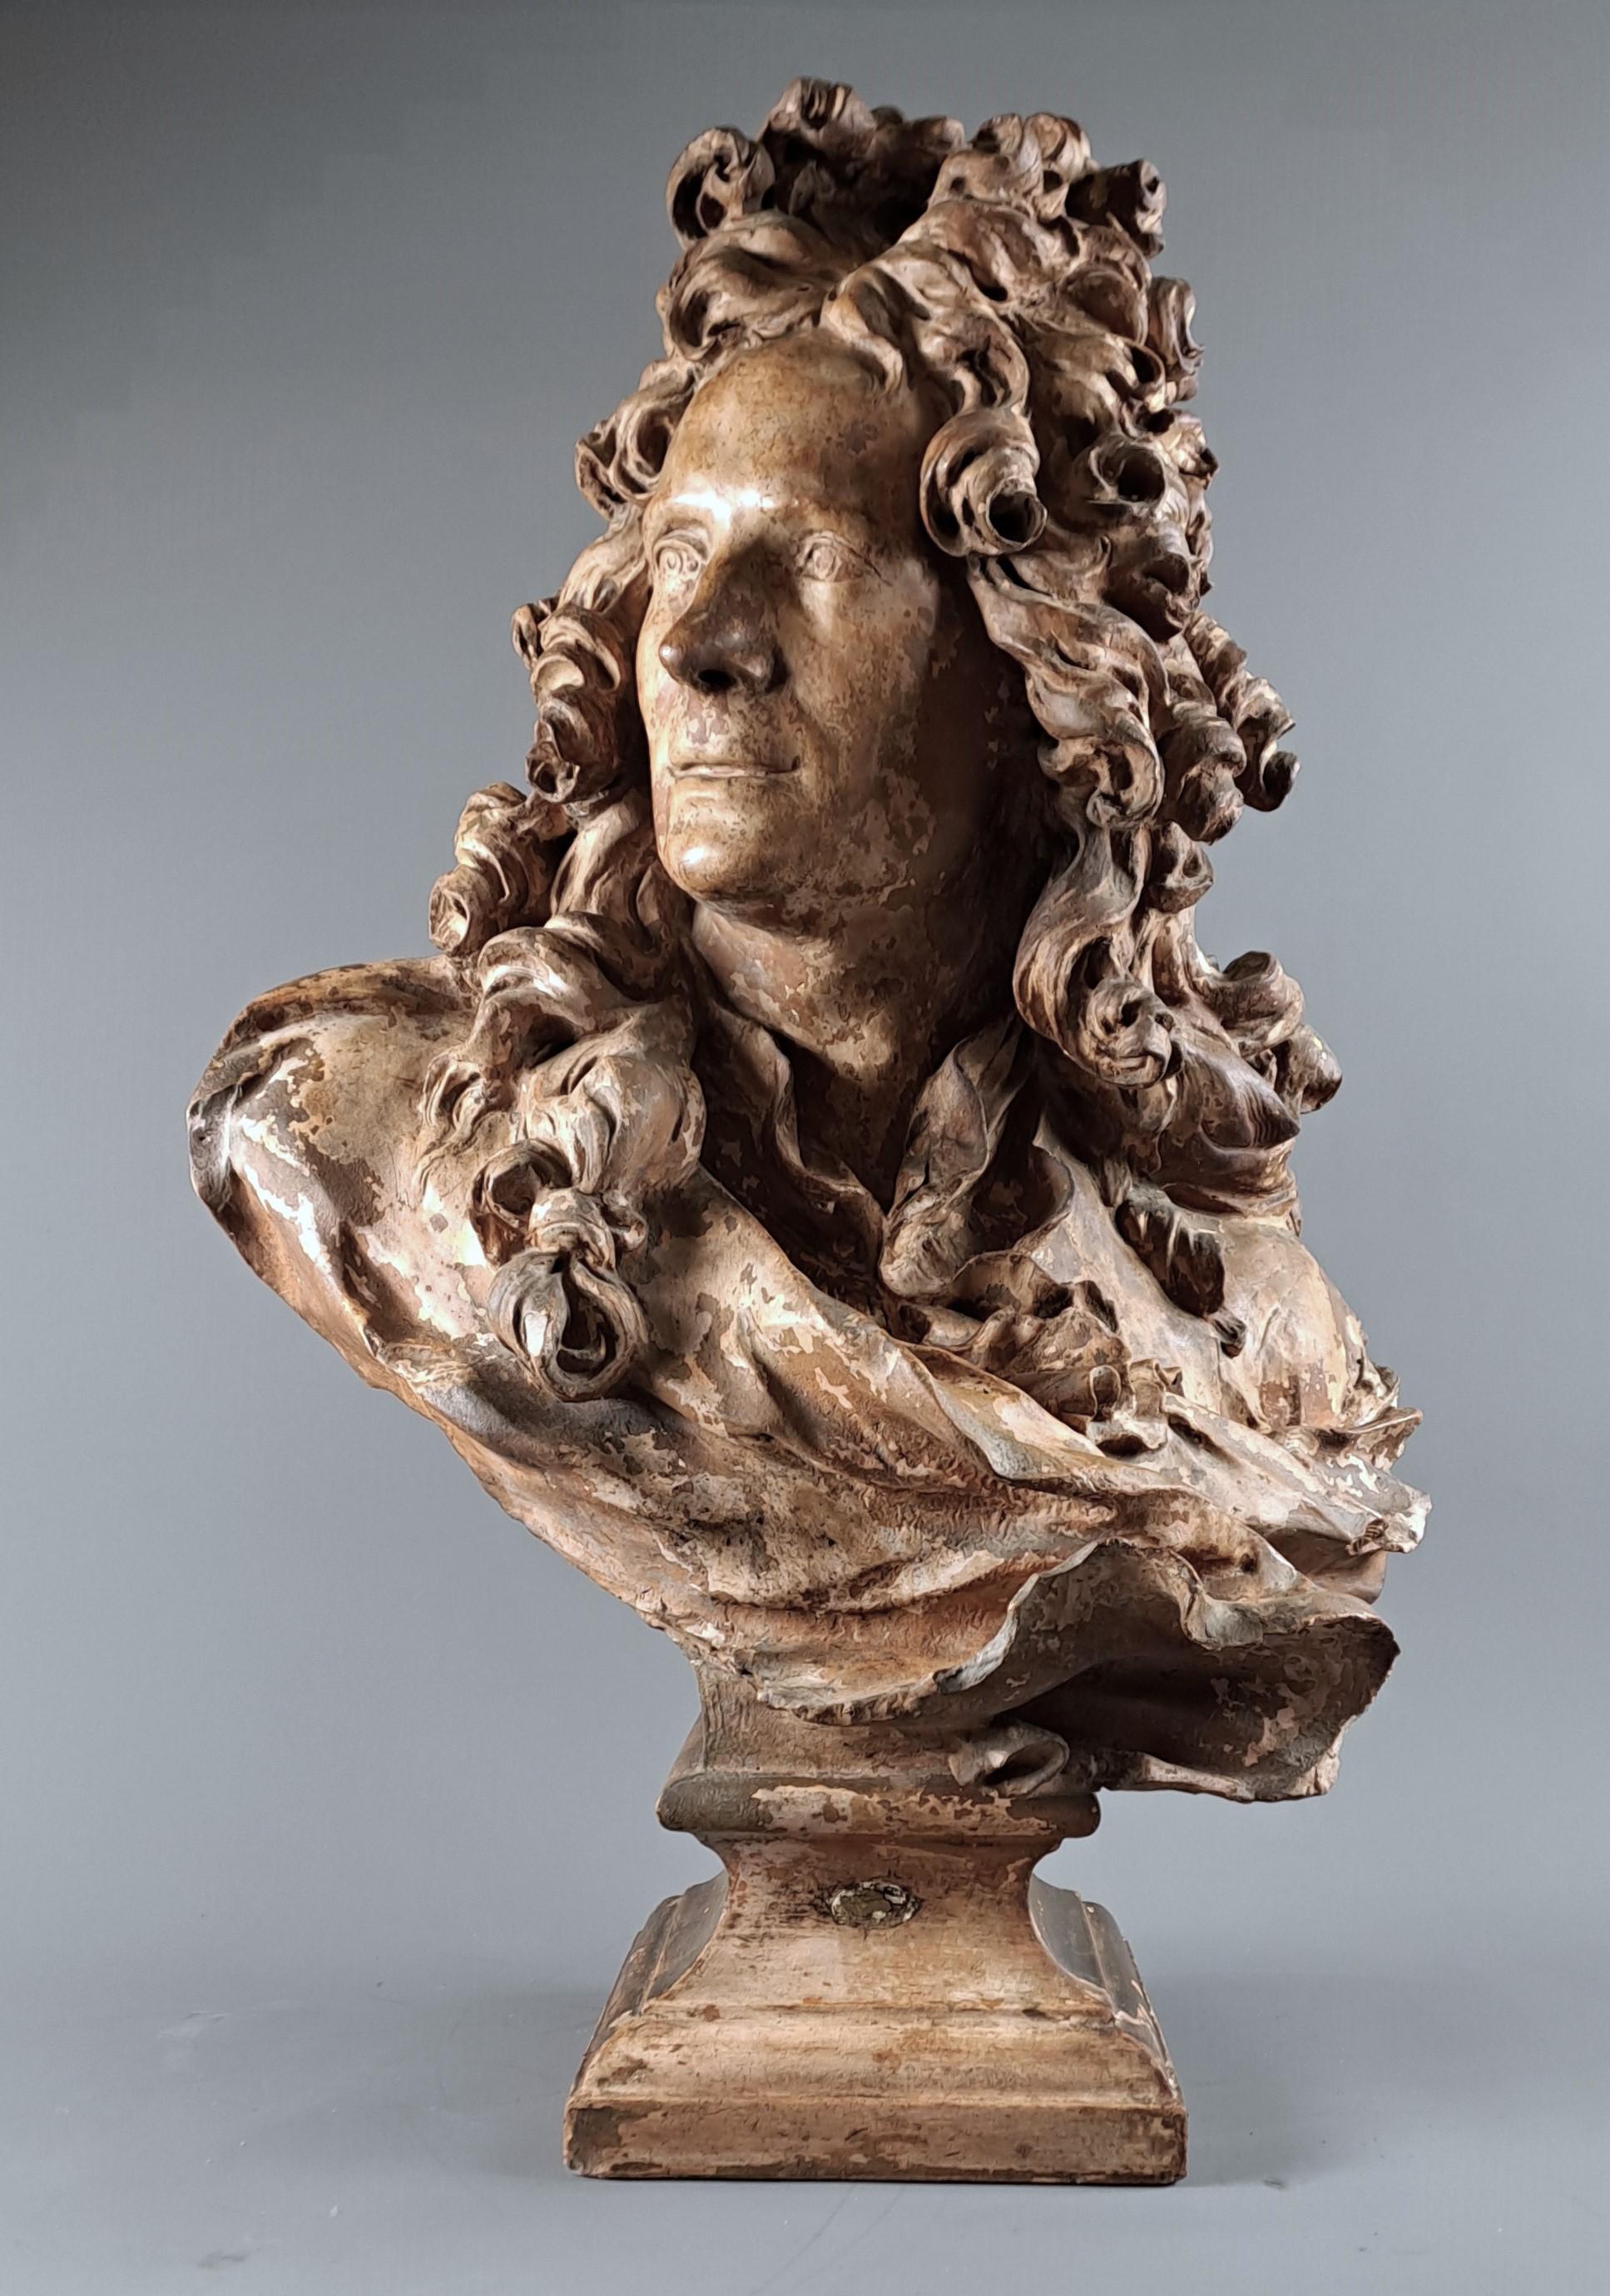 French Large Bust Of Corneille Van Cleve In Terracotta After Caffieri Jean-jacques For Sale